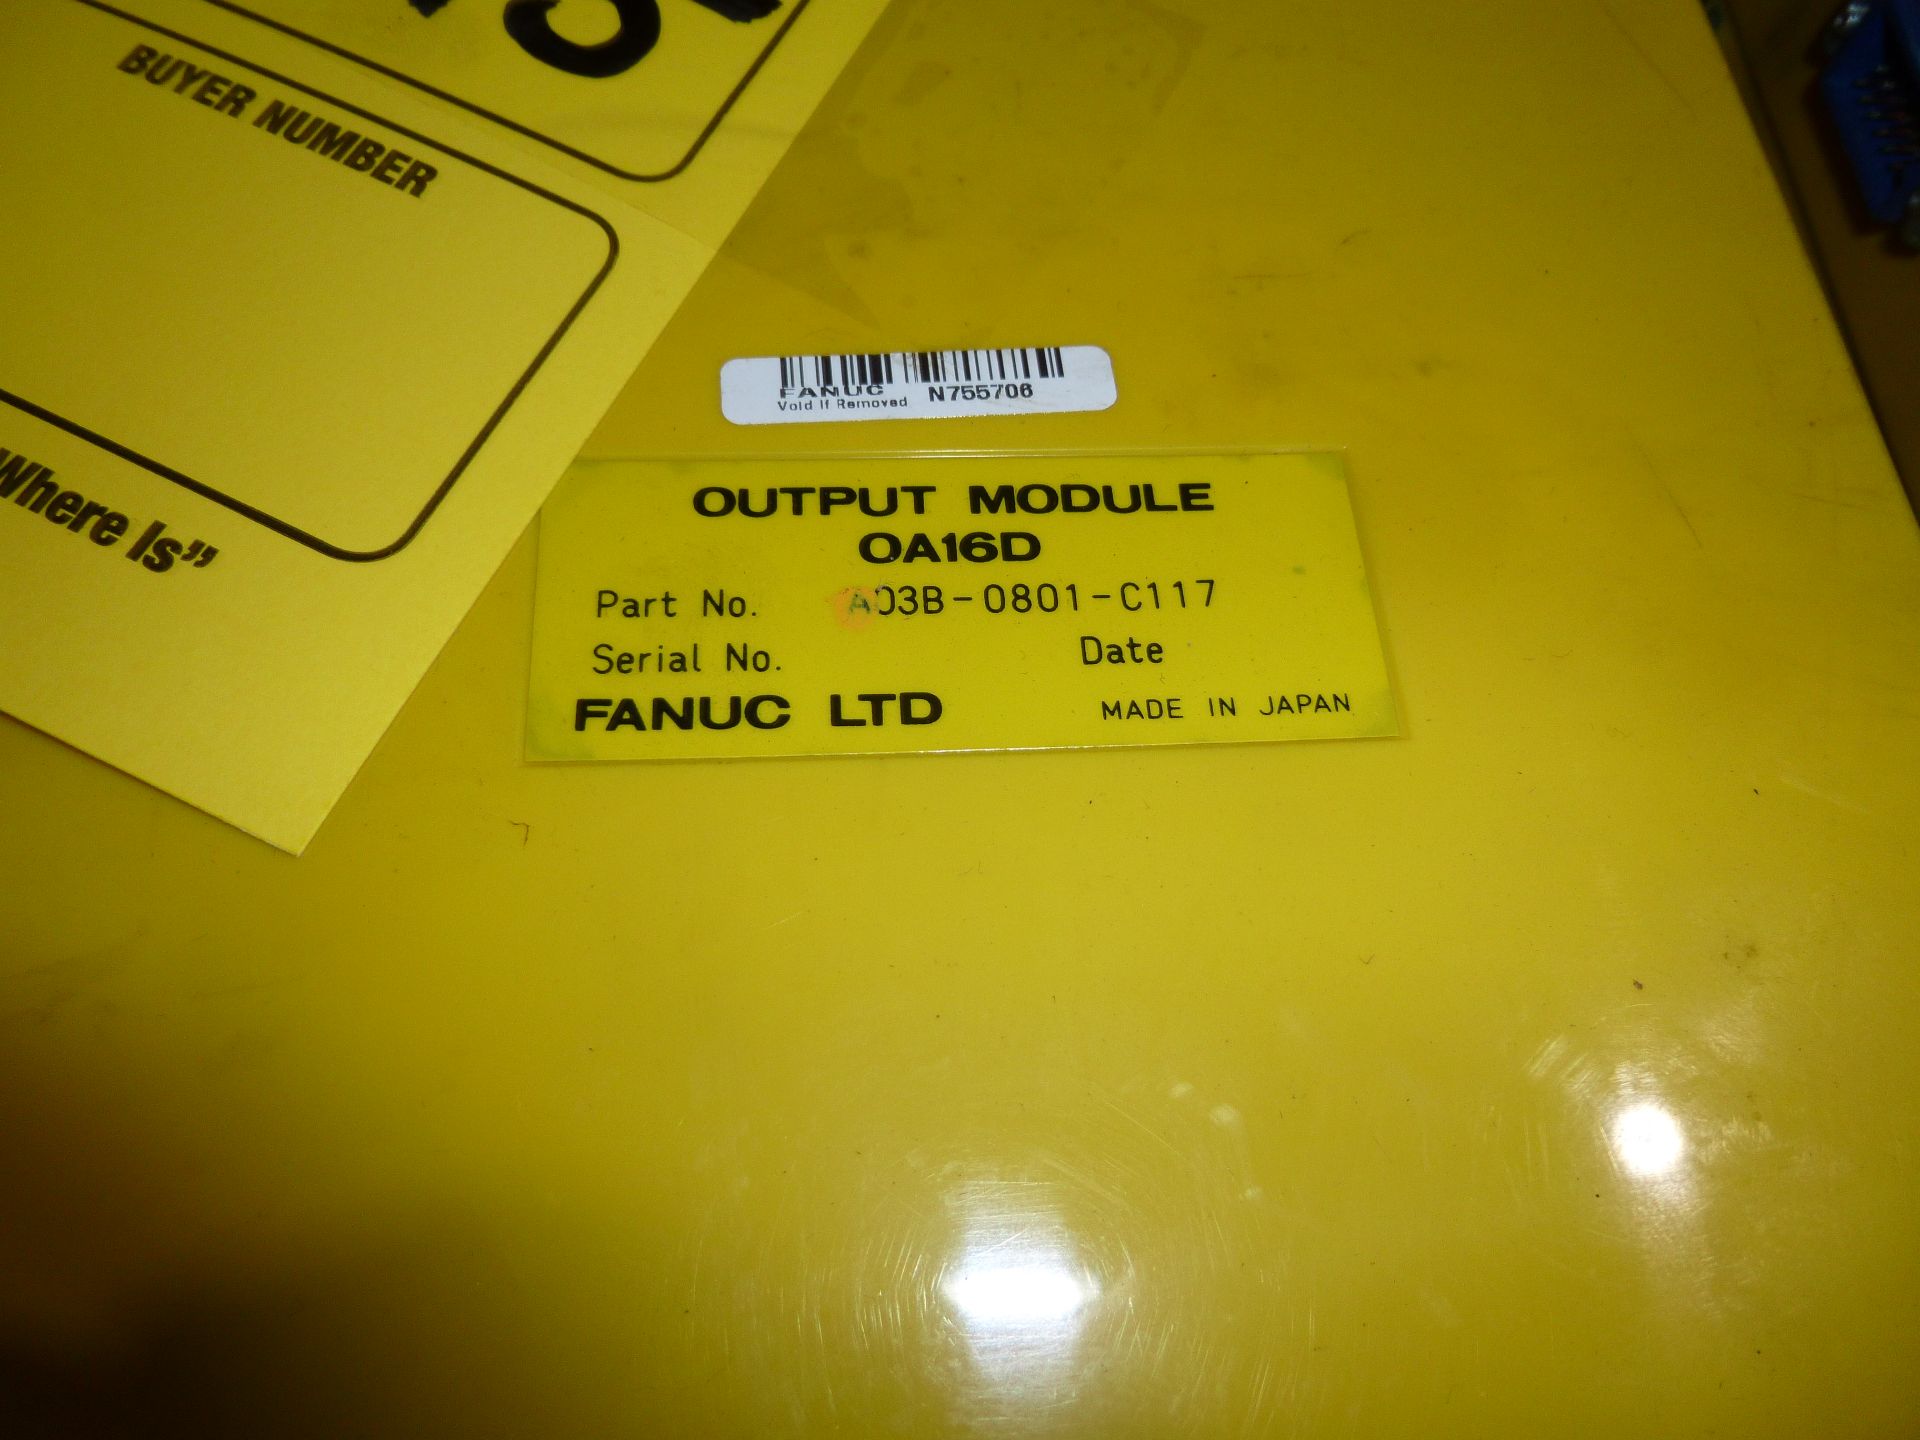 Qty 2 Fanuc output module model A03B-0801-C115, as always with Brolyn LLC auctions, all lots can - Image 3 of 3